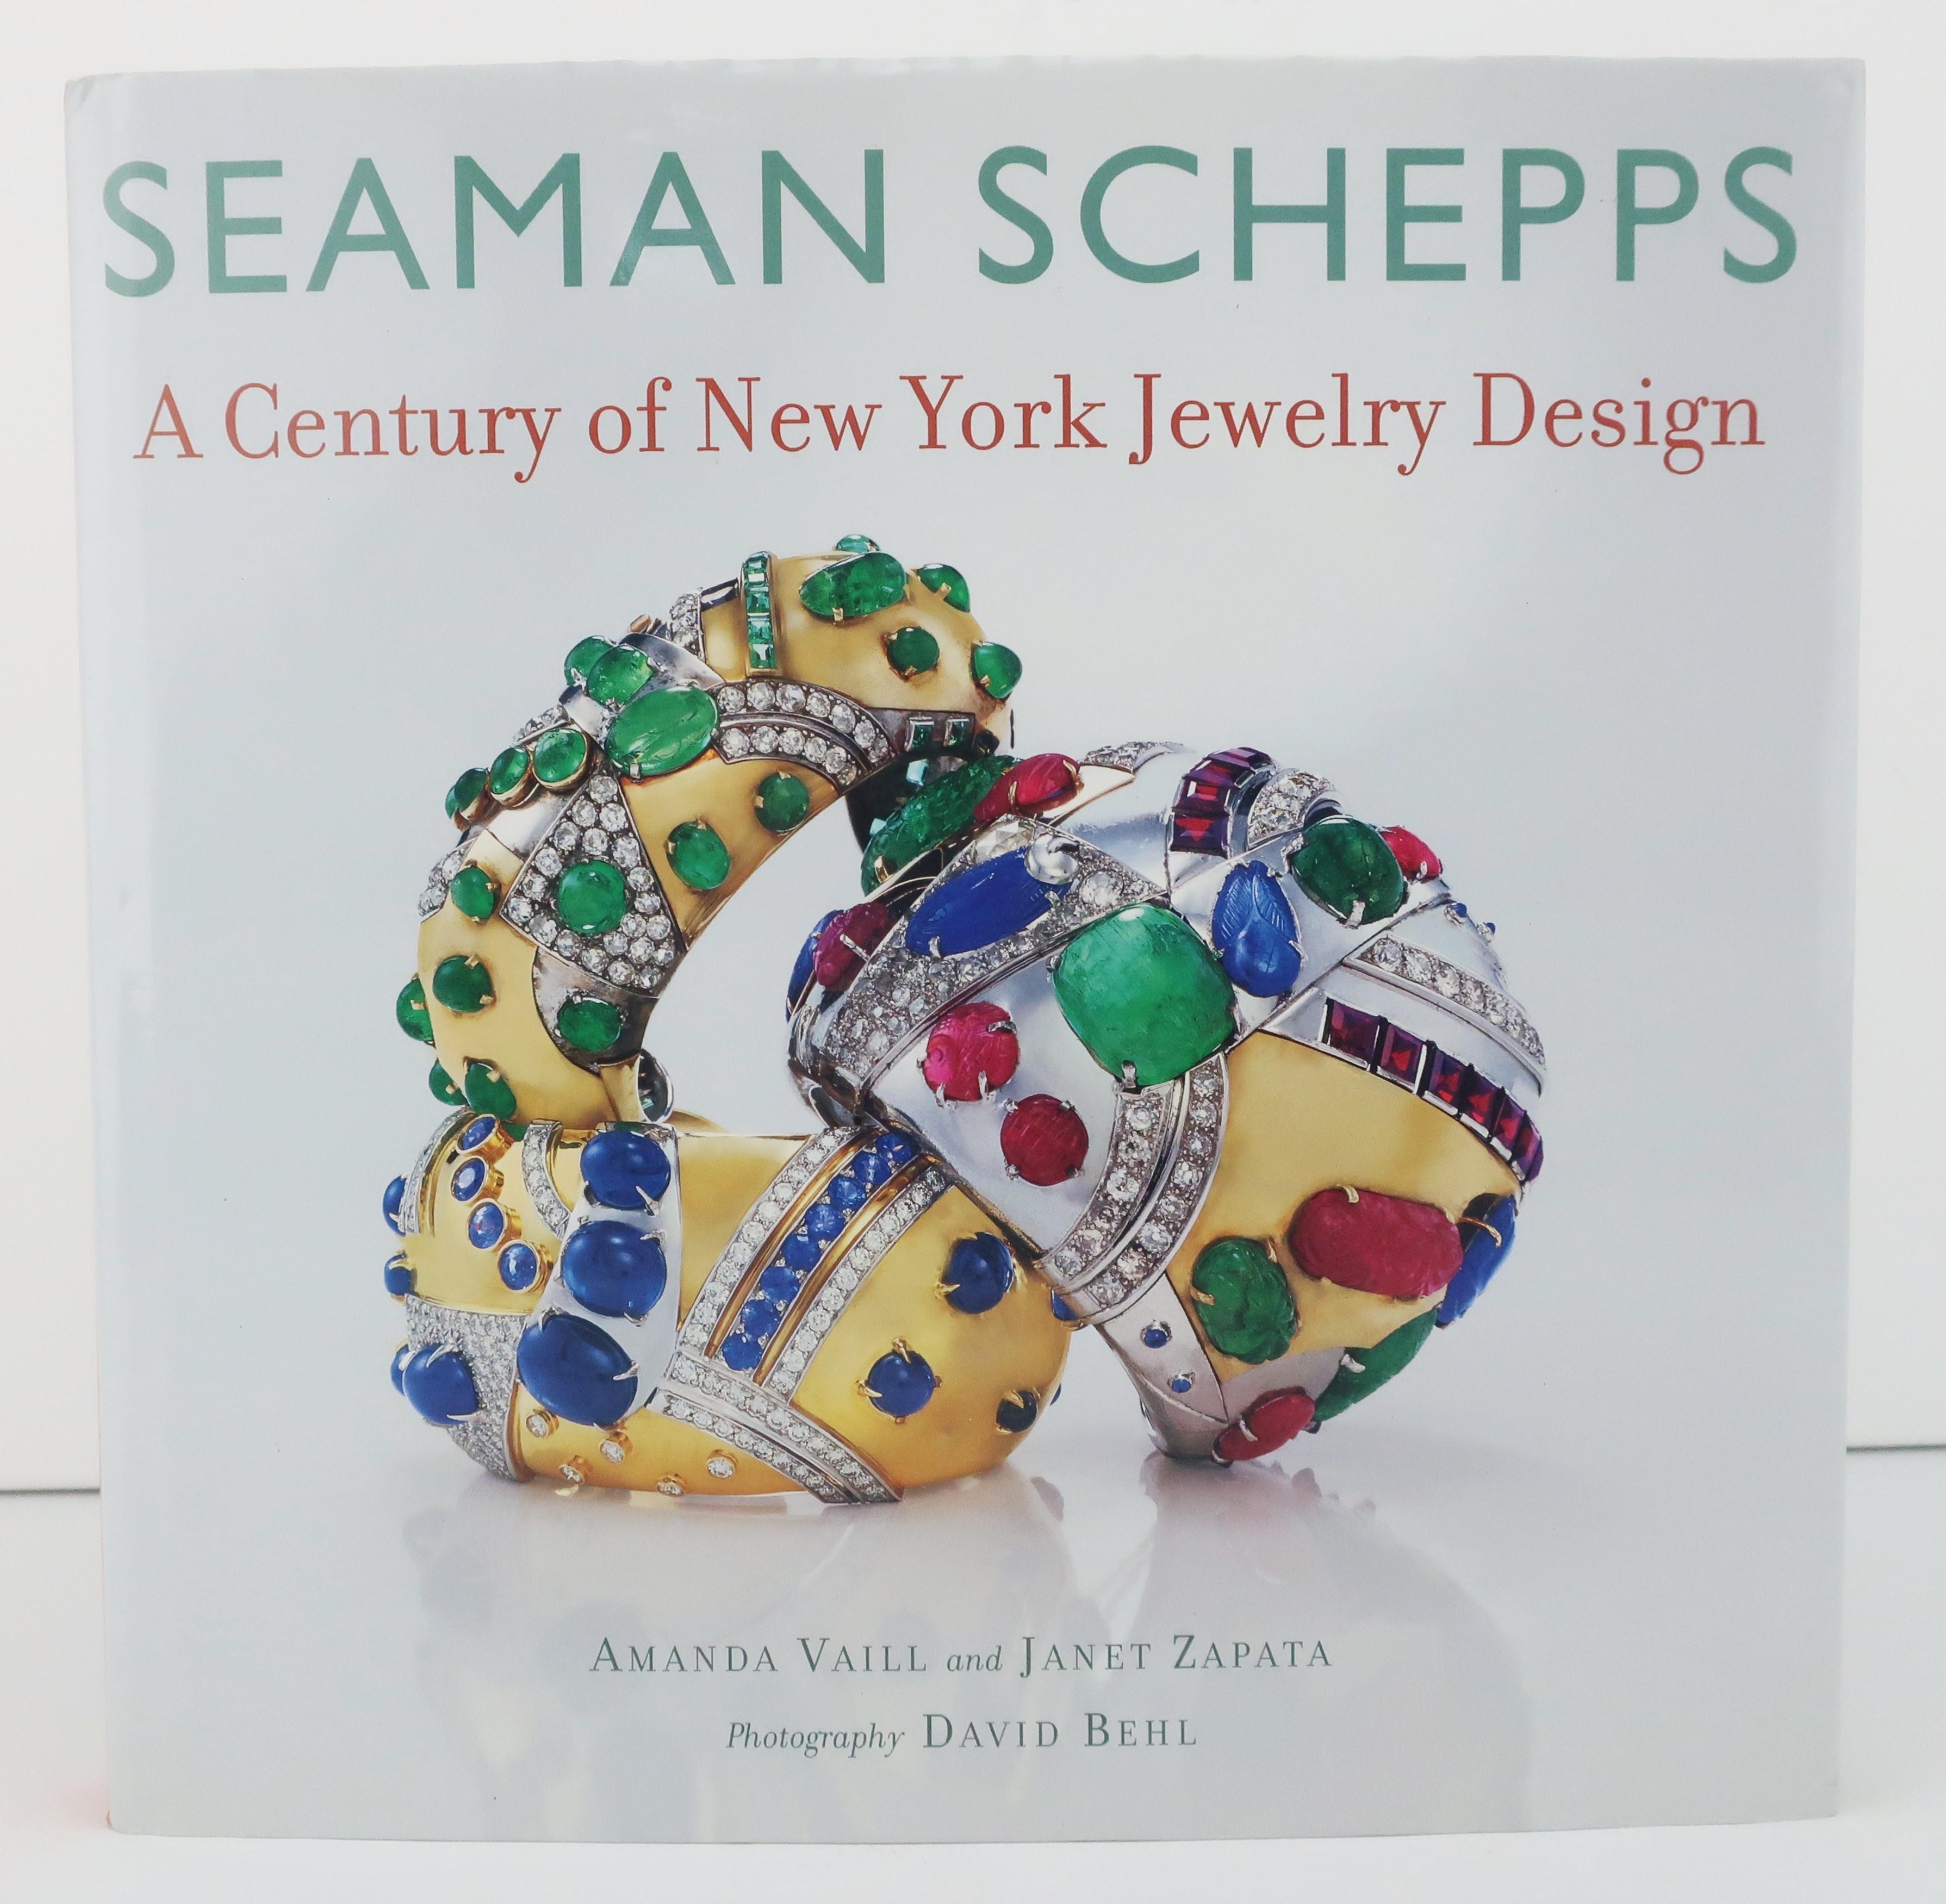 New Yorker Seaman Schepps (1881-1972) became affectionately known as 'America's Court Jeweler' for his popularity among influential people including first ladies, artists, Hollywood royalty and power brokers.  His unique style incorporated whimsical